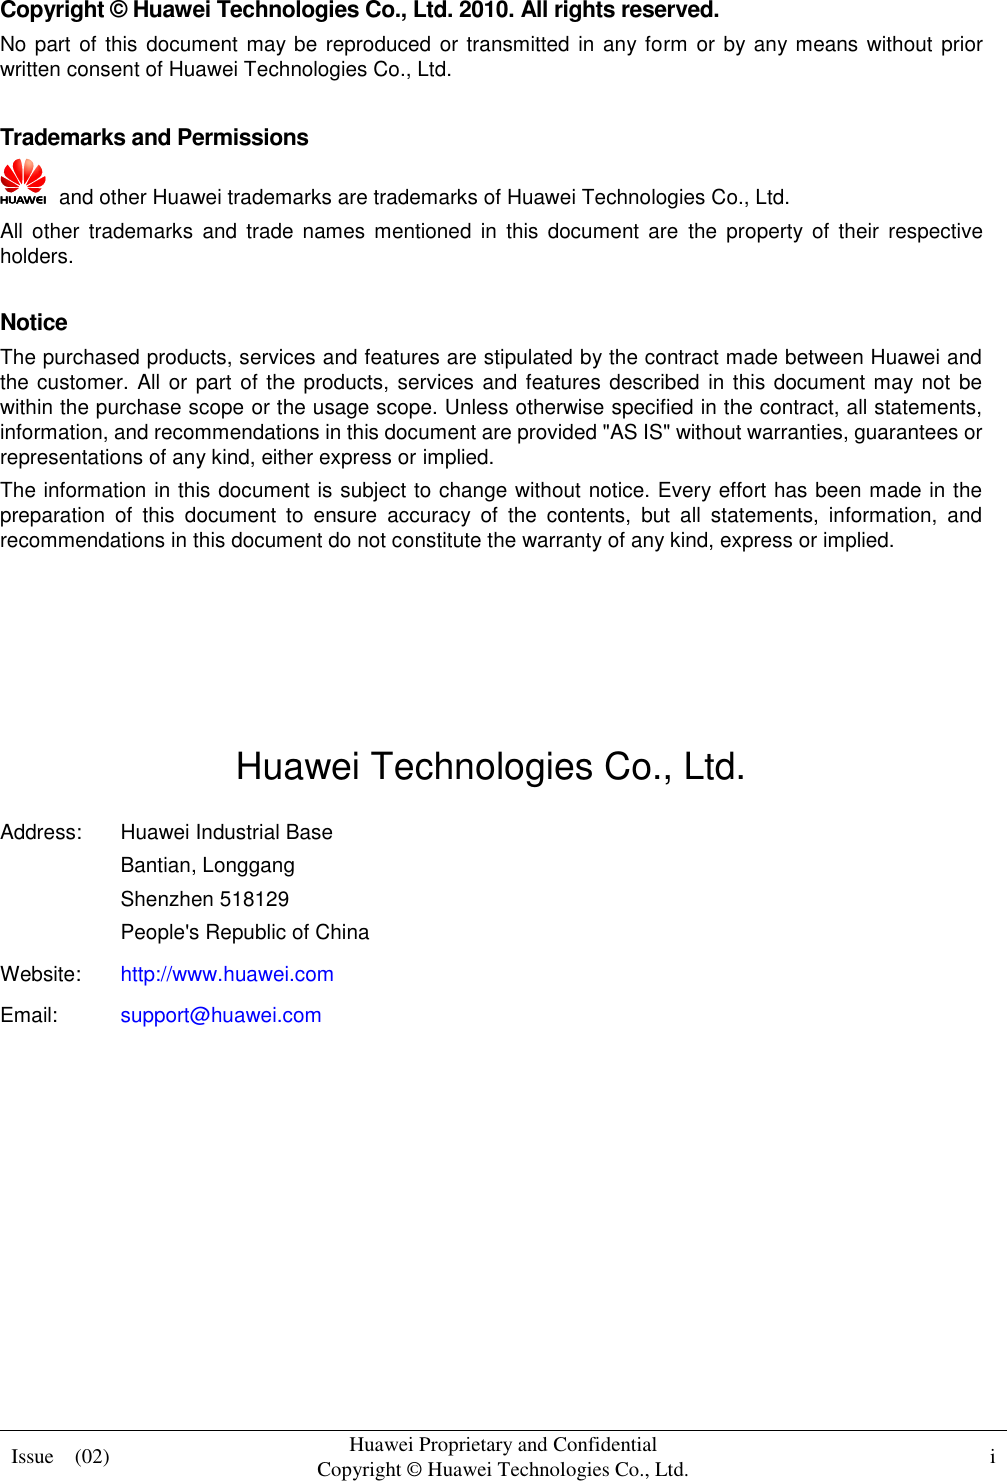  Issue    (02) Huawei Proprietary and Confidential                                     Copyright © Huawei Technologies Co., Ltd. i    Copyright © Huawei Technologies Co., Ltd. 2010. All rights reserved. No part of this  document  may be reproduced or transmitted in any form or by any means without prior written consent of Huawei Technologies Co., Ltd.  Trademarks and Permissions   and other Huawei trademarks are trademarks of Huawei Technologies Co., Ltd. All  other  trademarks  and  trade  names  mentioned  in  this  document  are  the  property  of their  respective holders.  Notice The purchased products, services and features are stipulated by the contract made between Huawei and the customer.  All or part  of the products, services  and features described in this document may not be within the purchase scope or the usage scope. Unless otherwise specified in the contract, all statements, information, and recommendations in this document are provided &quot;AS IS&quot; without warranties, guarantees or representations of any kind, either express or implied. The information in this document is subject to change without notice. Every effort has been made in the preparation  of  this  document  to  ensure  accuracy  of  the  contents,  but  all  statements,  information,  and recommendations in this document do not constitute the warranty of any kind, express or implied.     Huawei Technologies Co., Ltd. Address: Huawei Industrial Base Bantian, Longgang Shenzhen 518129 People&apos;s Republic of China Website: http://www.huawei.com Email: support@huawei.com          